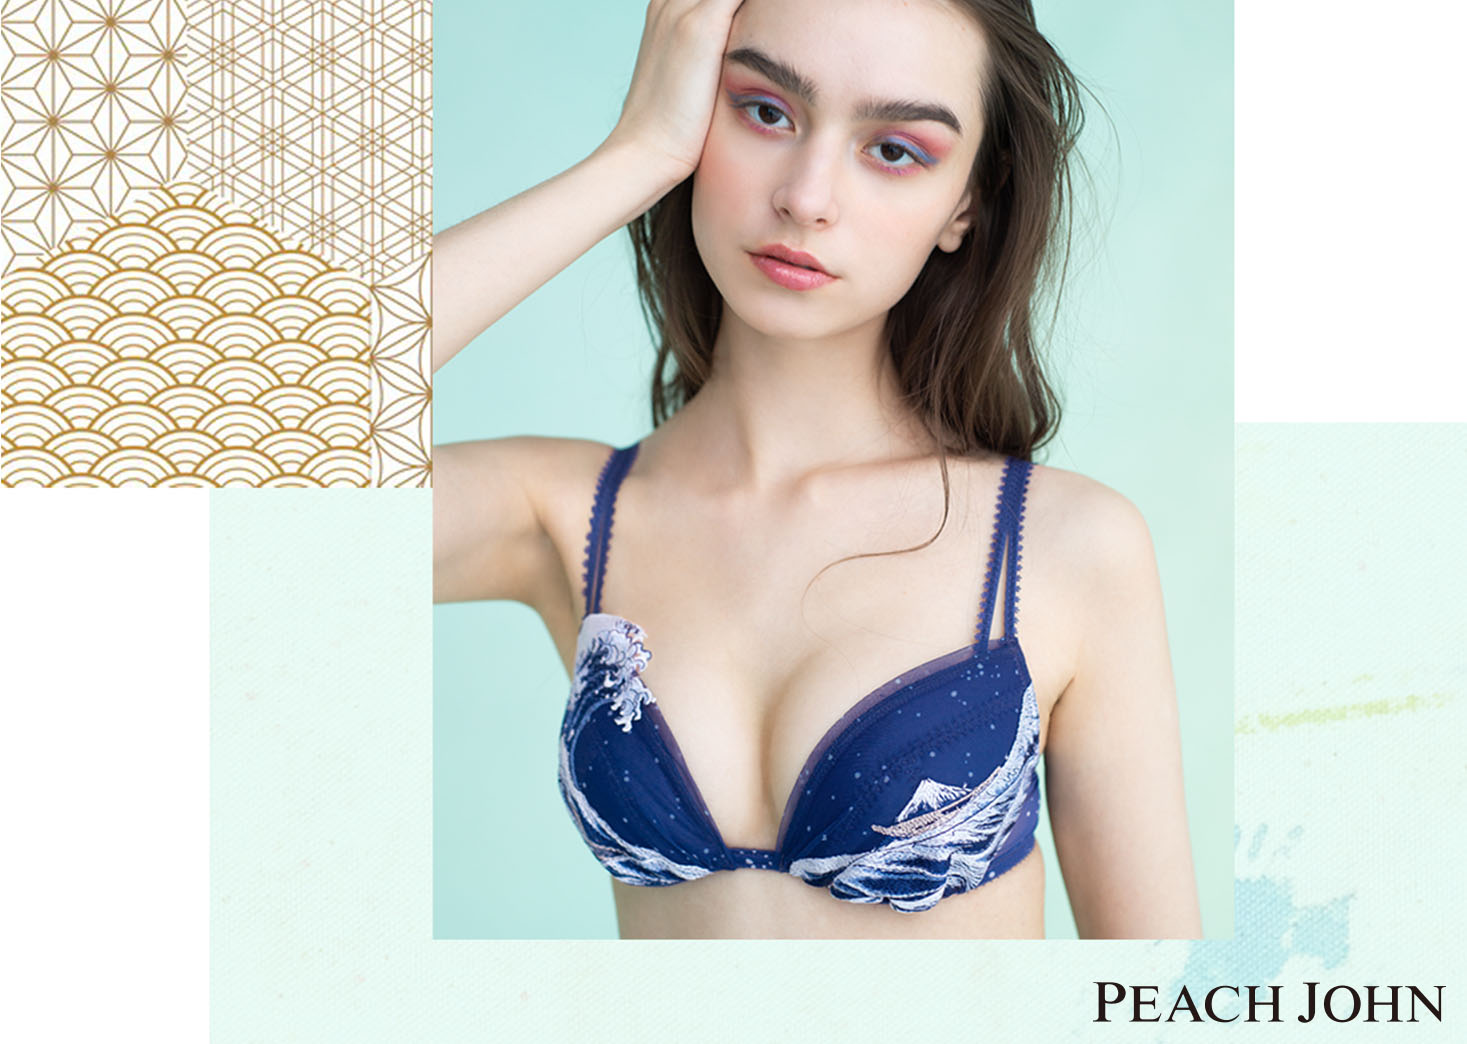 New Mt Fuji bra set lets you wear Japanese art under your clothes